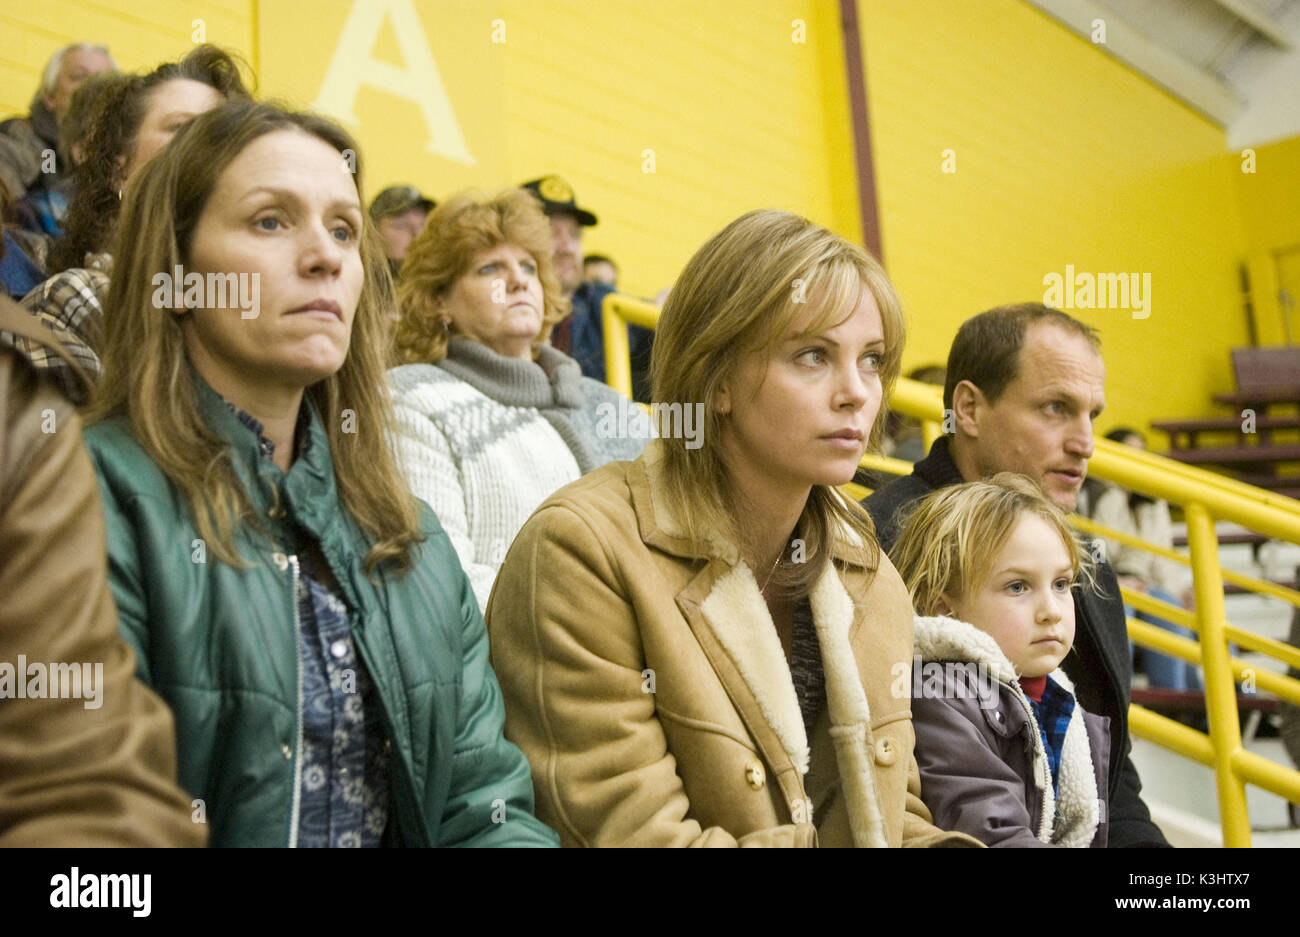 L-r: FRANCES McDORMAND as Glory, CHARLIZE THERON as Josey Aimes, ELIZABETH PETERSON as Karen Aimes, and WOODY HARRELSON as Bill White in Warner Bros. Pictures' drama, North Country. PHOTOGRAPHS TO BE USED SOLELY FOR ADVERTISING, PROMOTION, PUBLICITY OR REVIEWS OF THIS SPECIFIC MOTION PICTURE AND TO REMAIN THE PROPERTY OF THE STUDIO. NOT FOR SALE OR REDISTRIBUTION. NORTH COUNTRY L-r: FRANCES McDORMAND as Glory, CHARLIZE THERON as Josey Aimes, ELIZABETH PETERSON as Karen Aimes, and WOODY HARRELSON as Bill White L-r: FRANCES McDORMAND as Glory, CHARLIZE THERON as Josey Aime Stock Photo